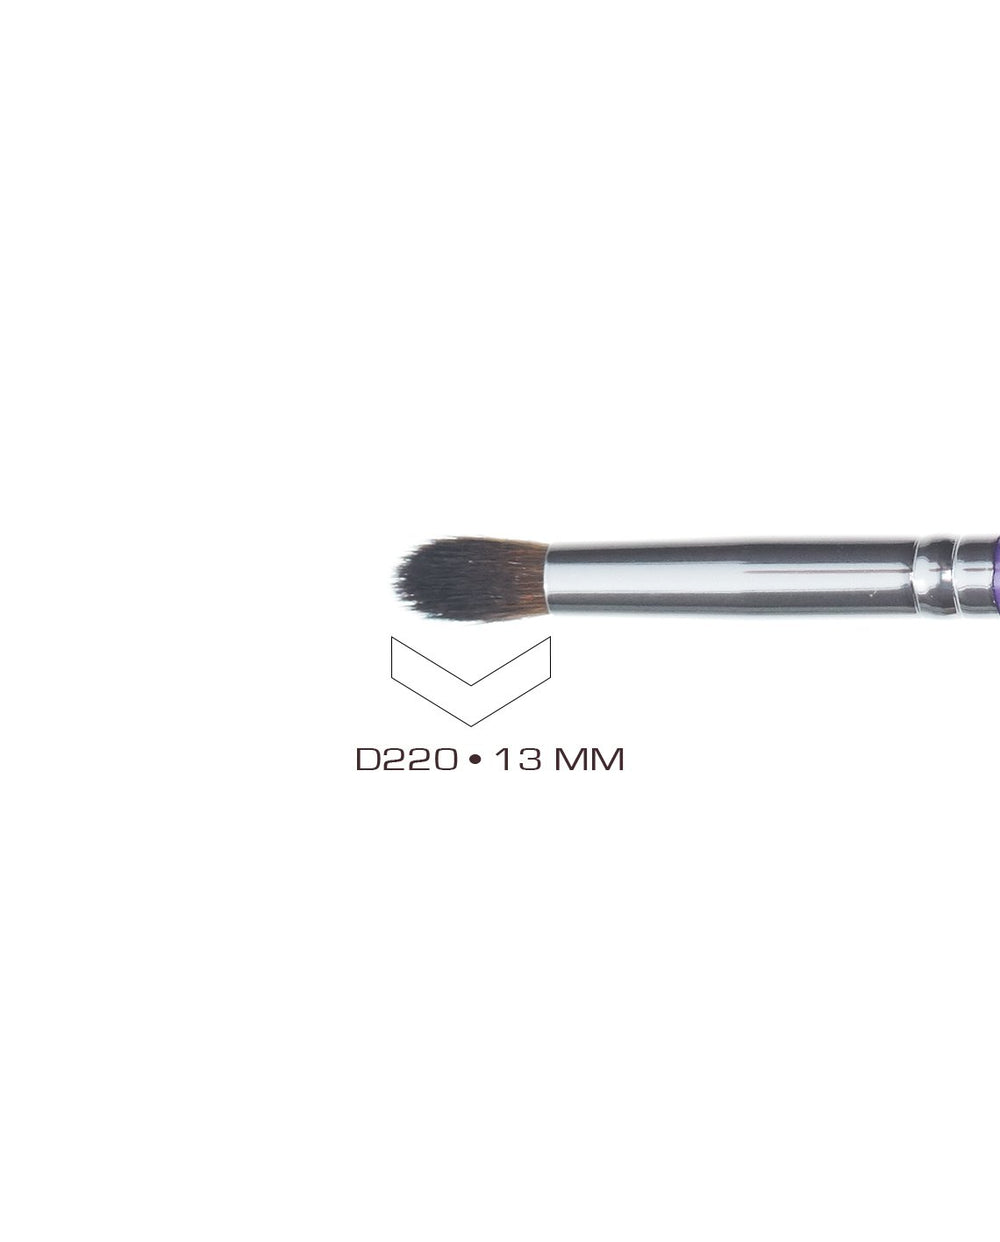 This is a close up of the brush of cozzets D220 Pencil blending brush